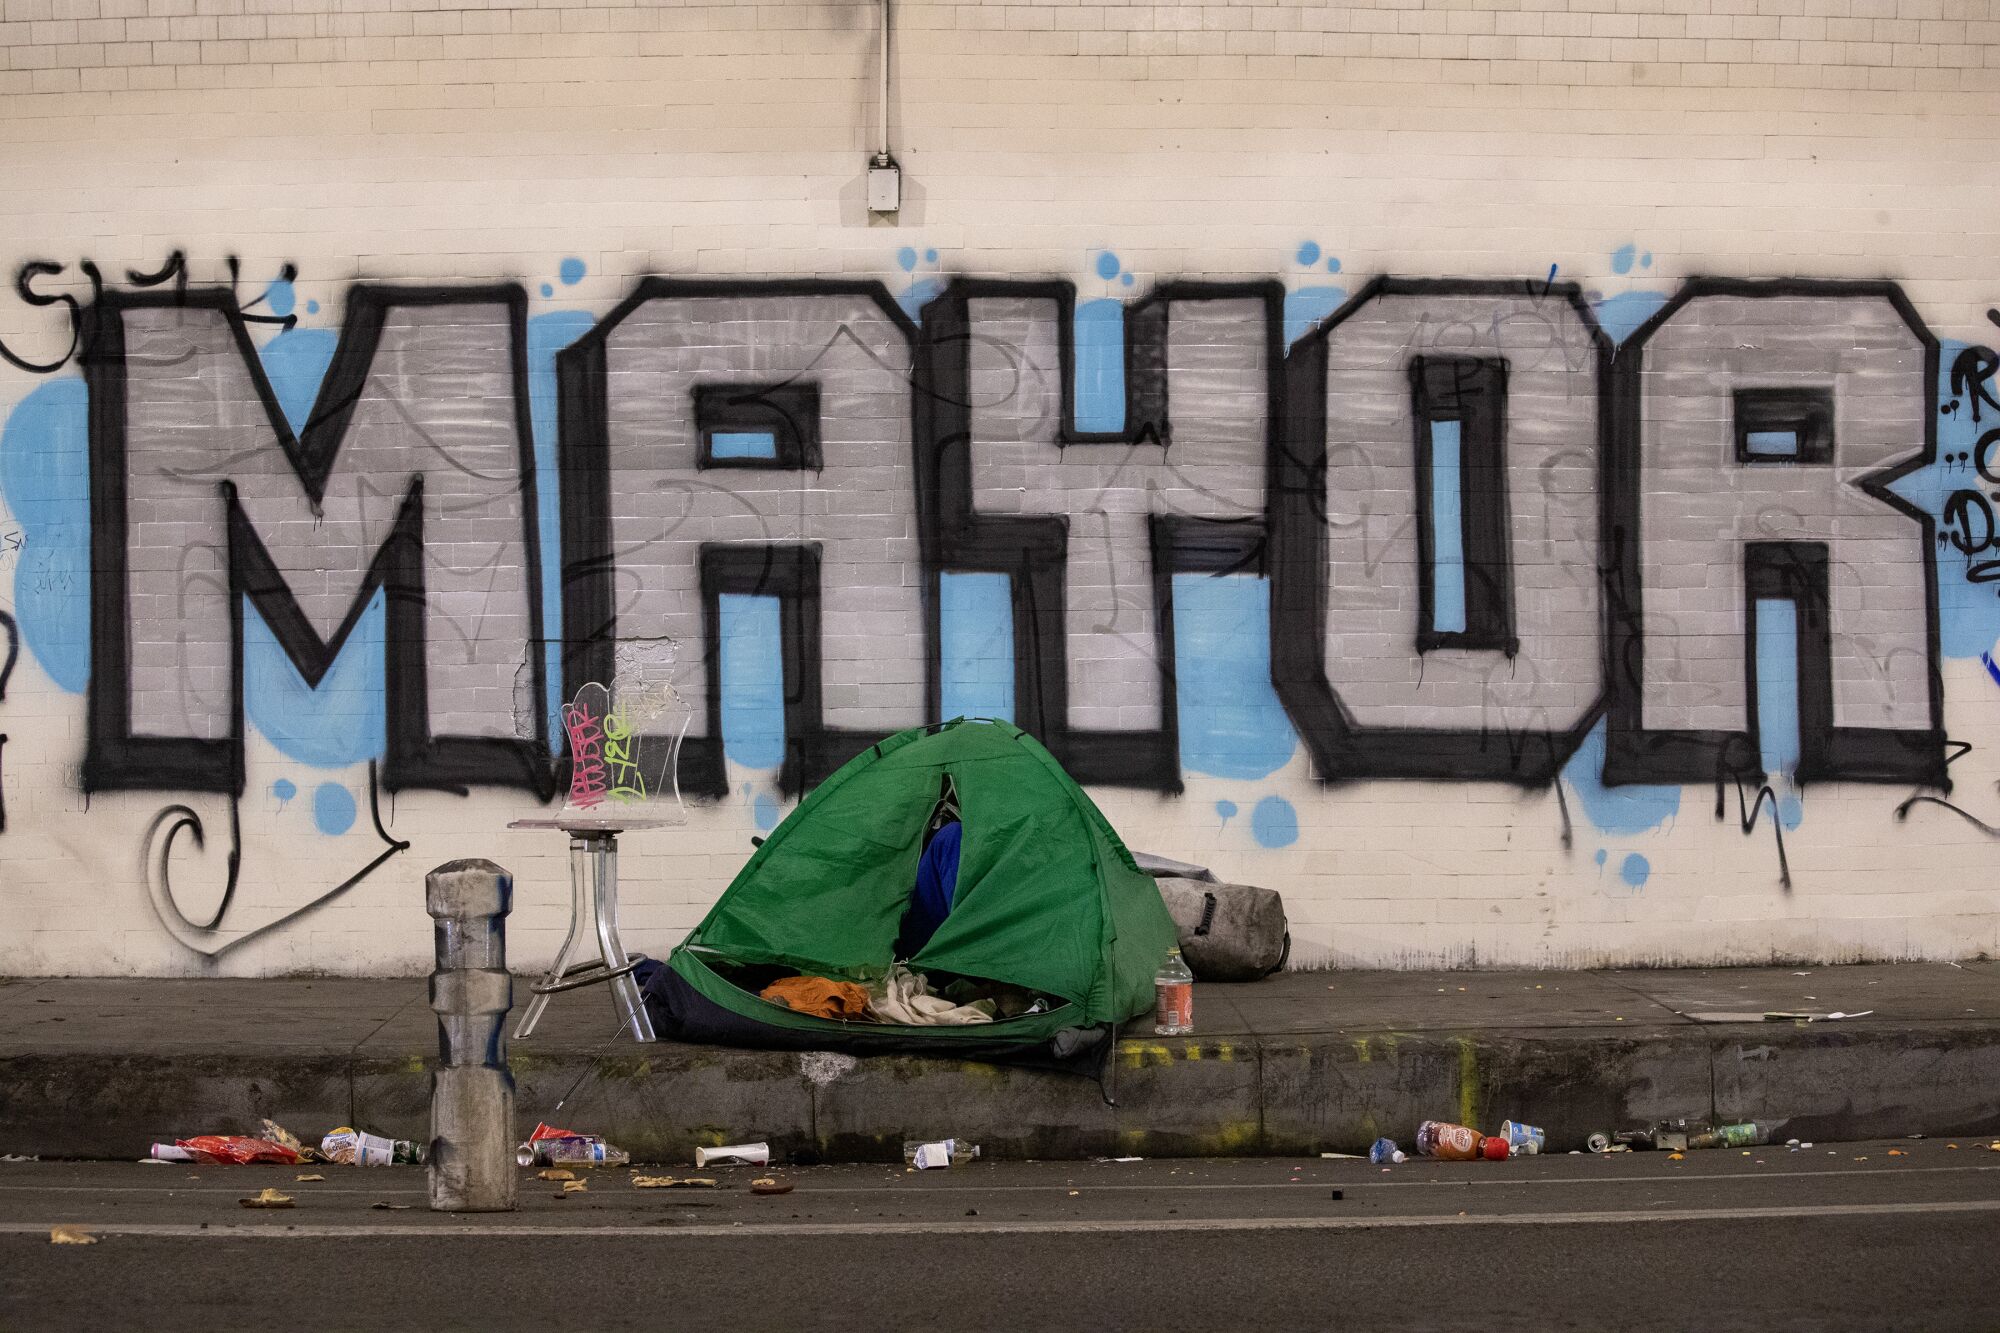 A homeless person sleeps in a tent on the sidewalk under graffiti that says 